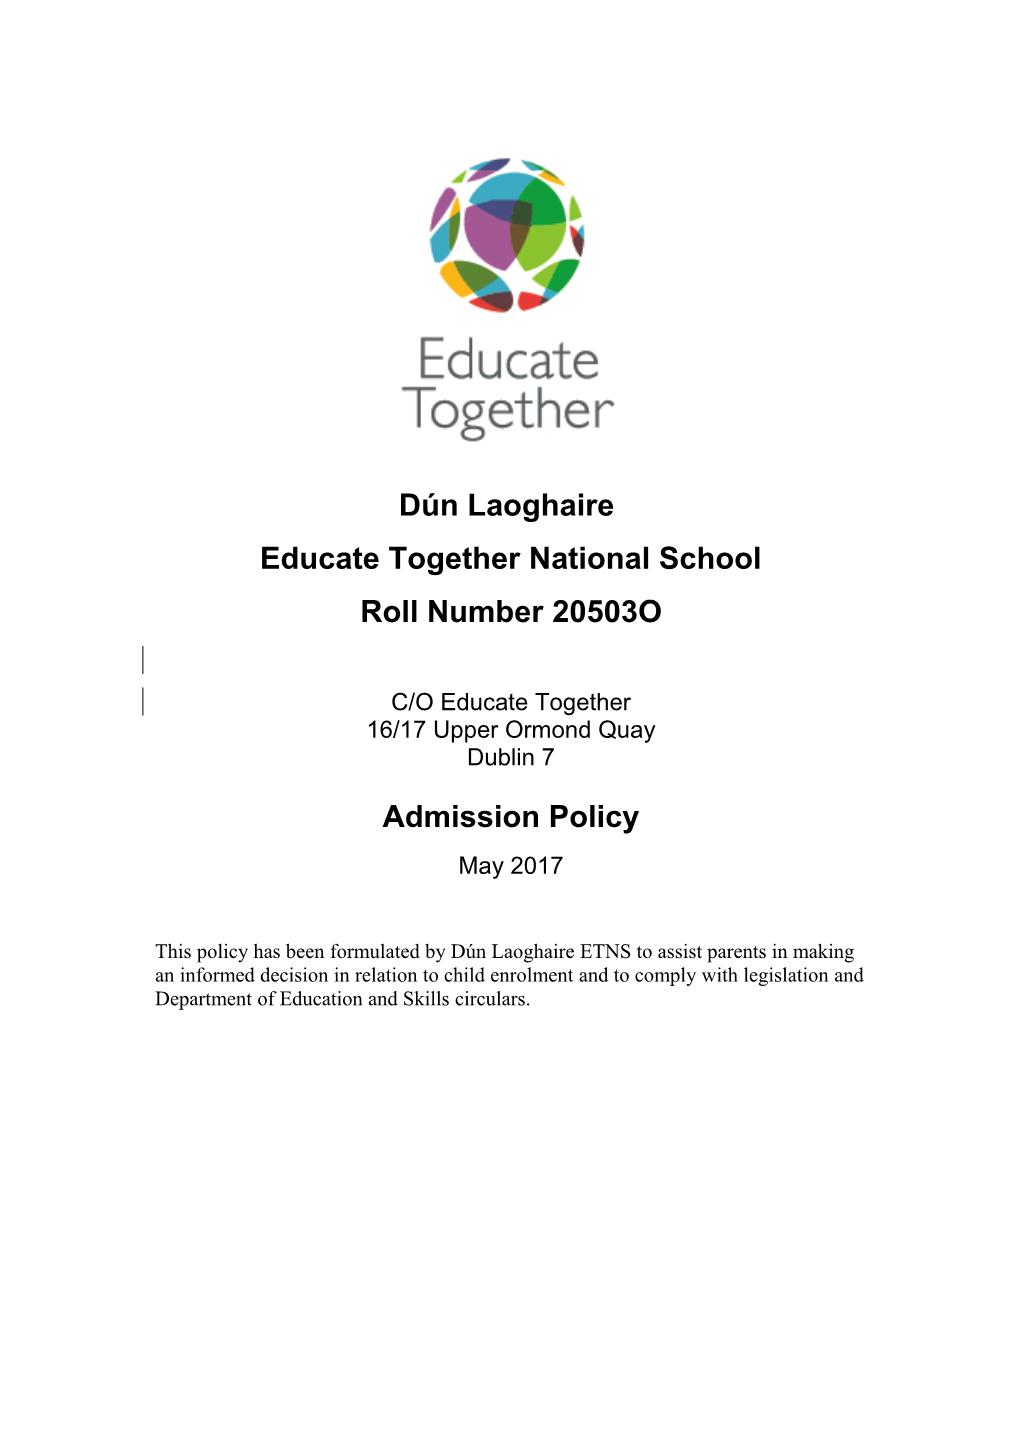 Educate Together National School